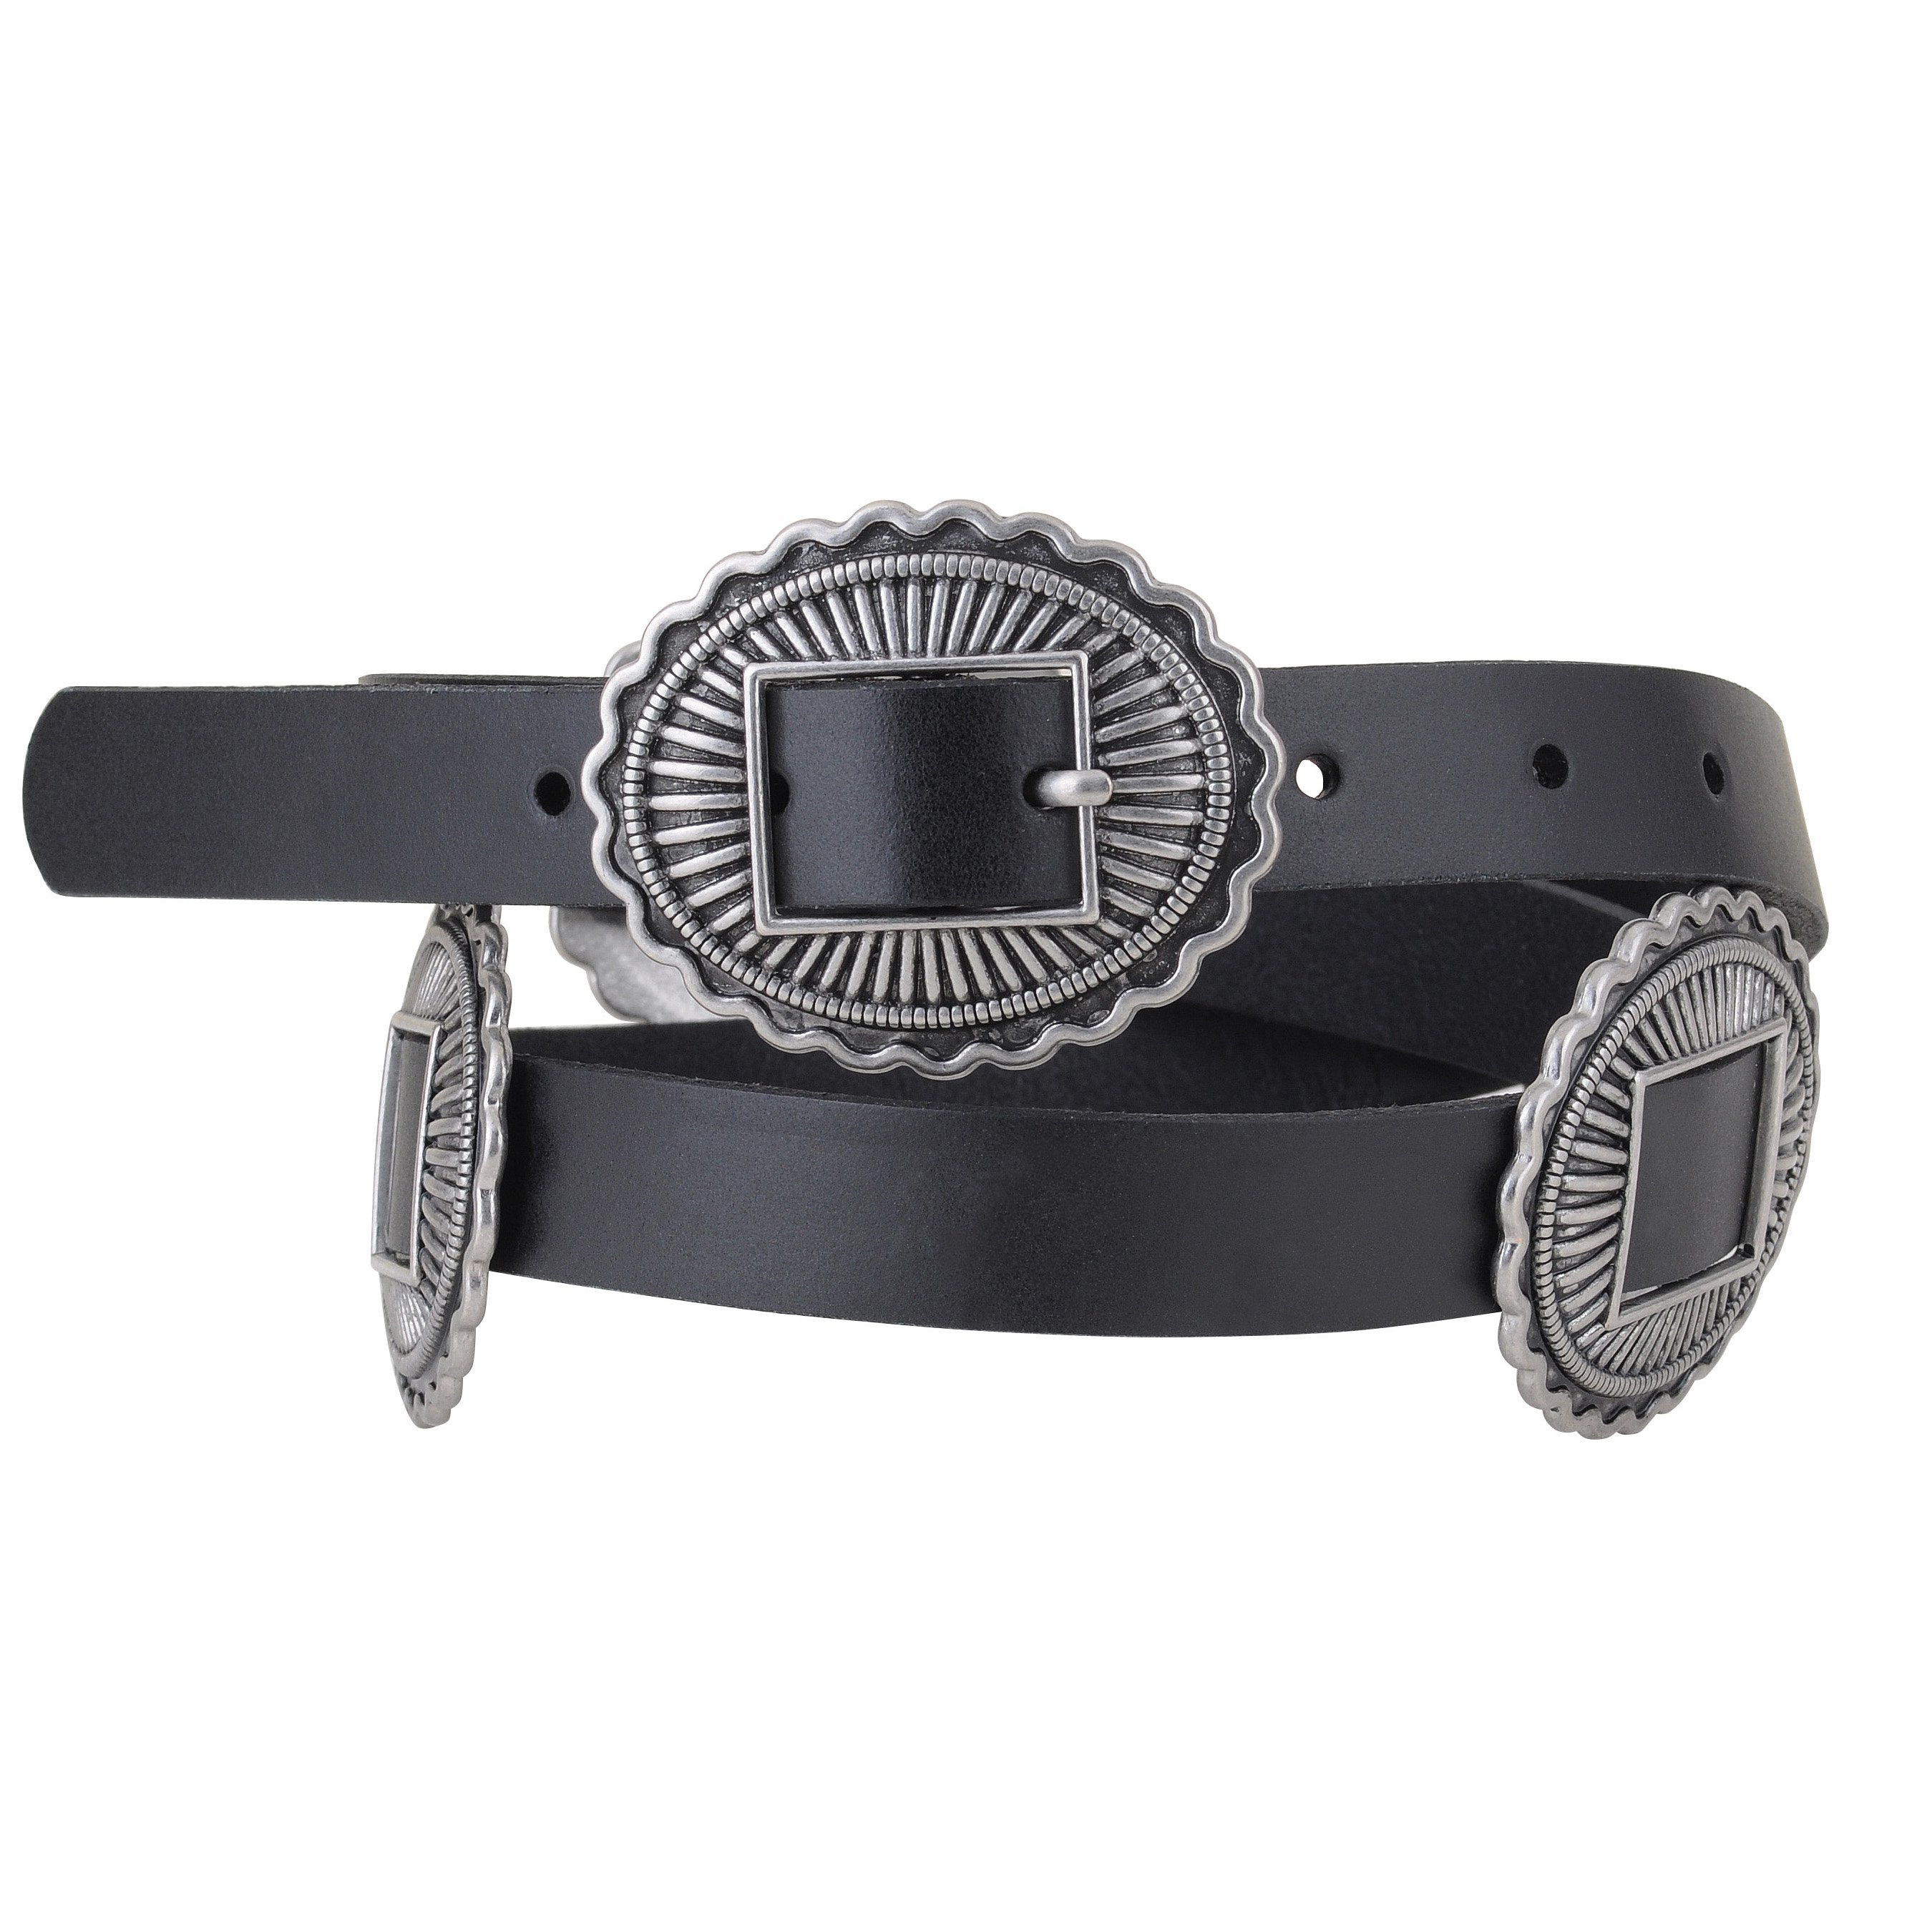 Black Leather Belt With Buc-ee's Conchos 28,30,40,46,56